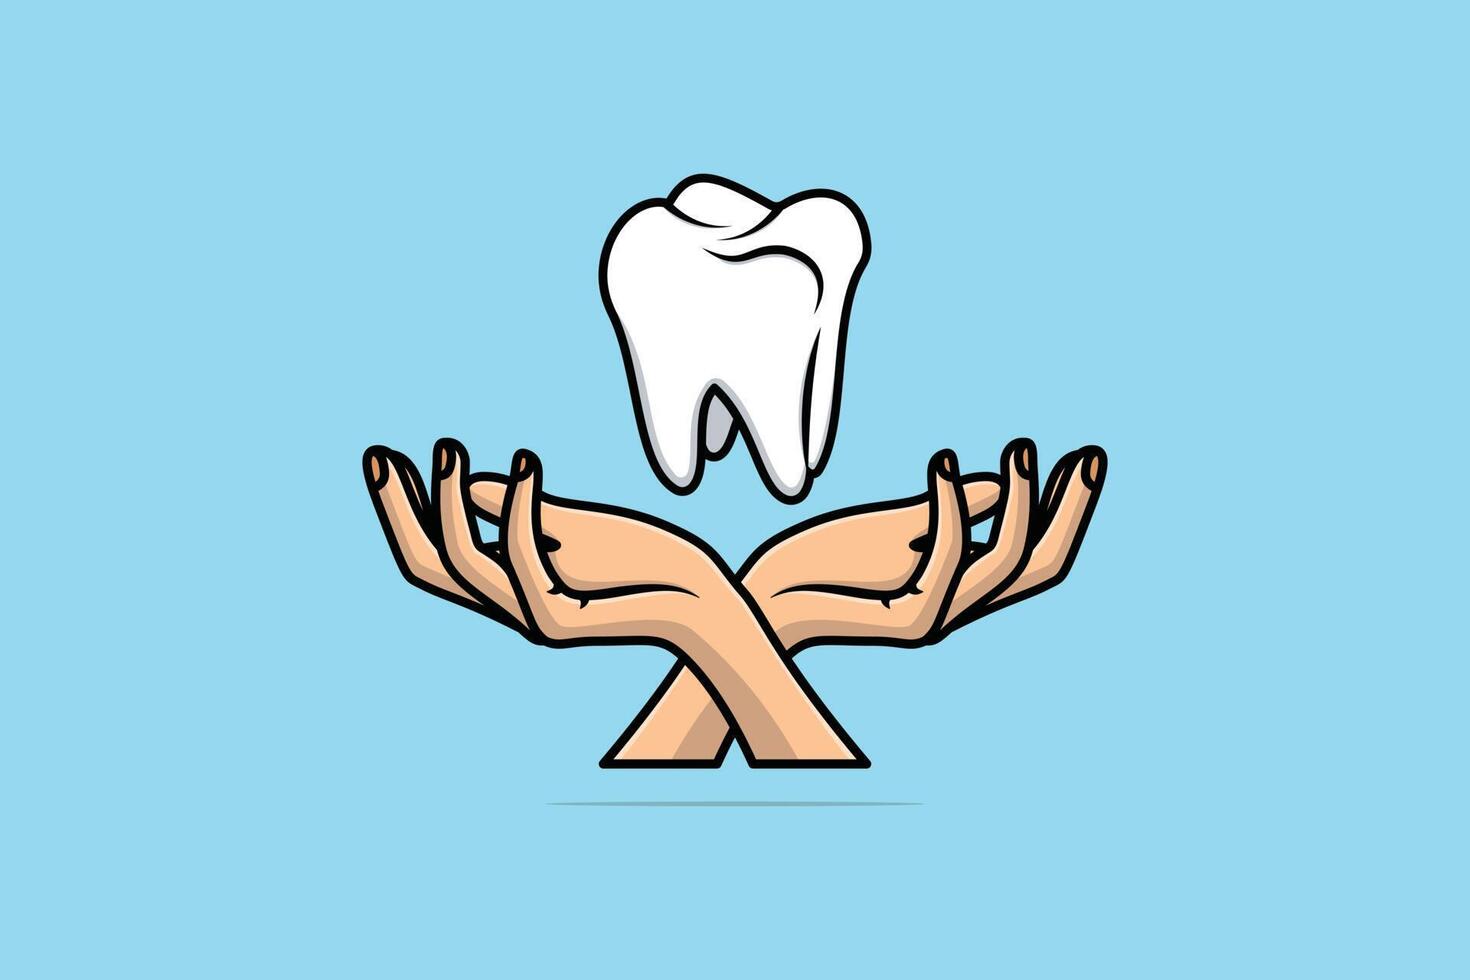 Dentist Tooth with Hands vector illustration. Healthcare and medical objects icon concept. Dentist tooth and dentist hands vector design. Dentist logo tooth with hand.